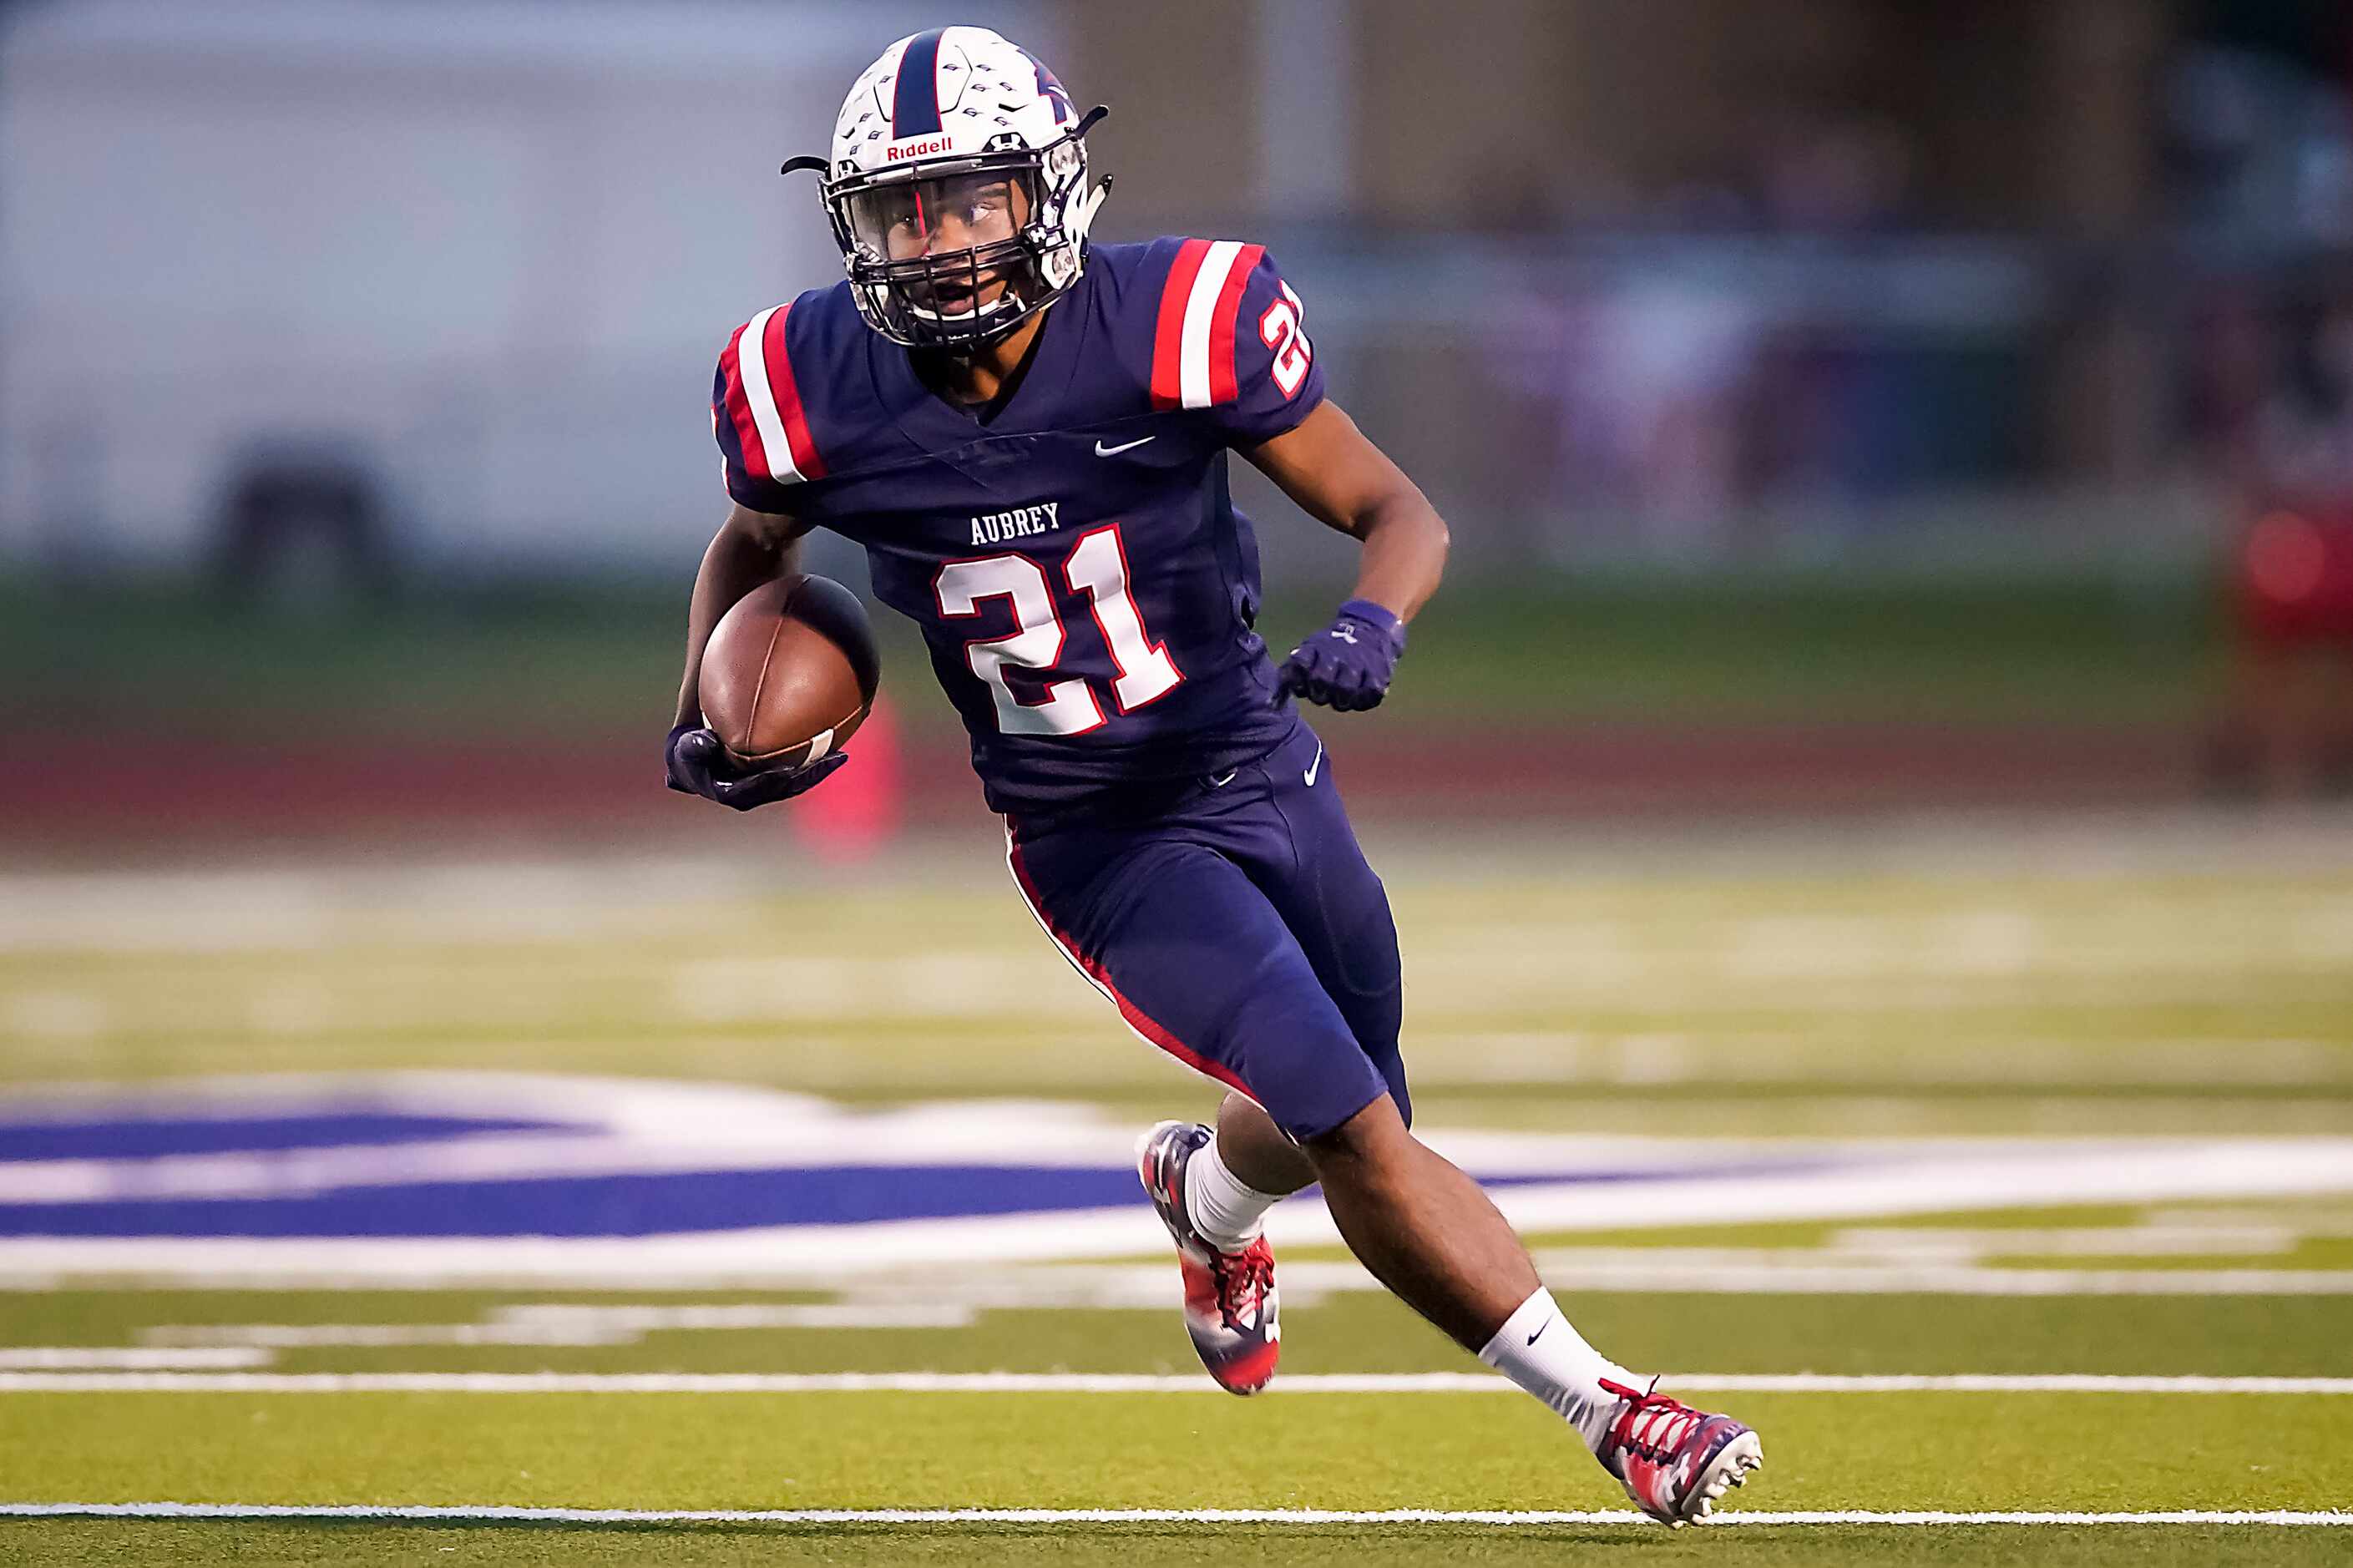 Aubrey running back Braylon Colgrove runs for a a first down during the first half of a high...